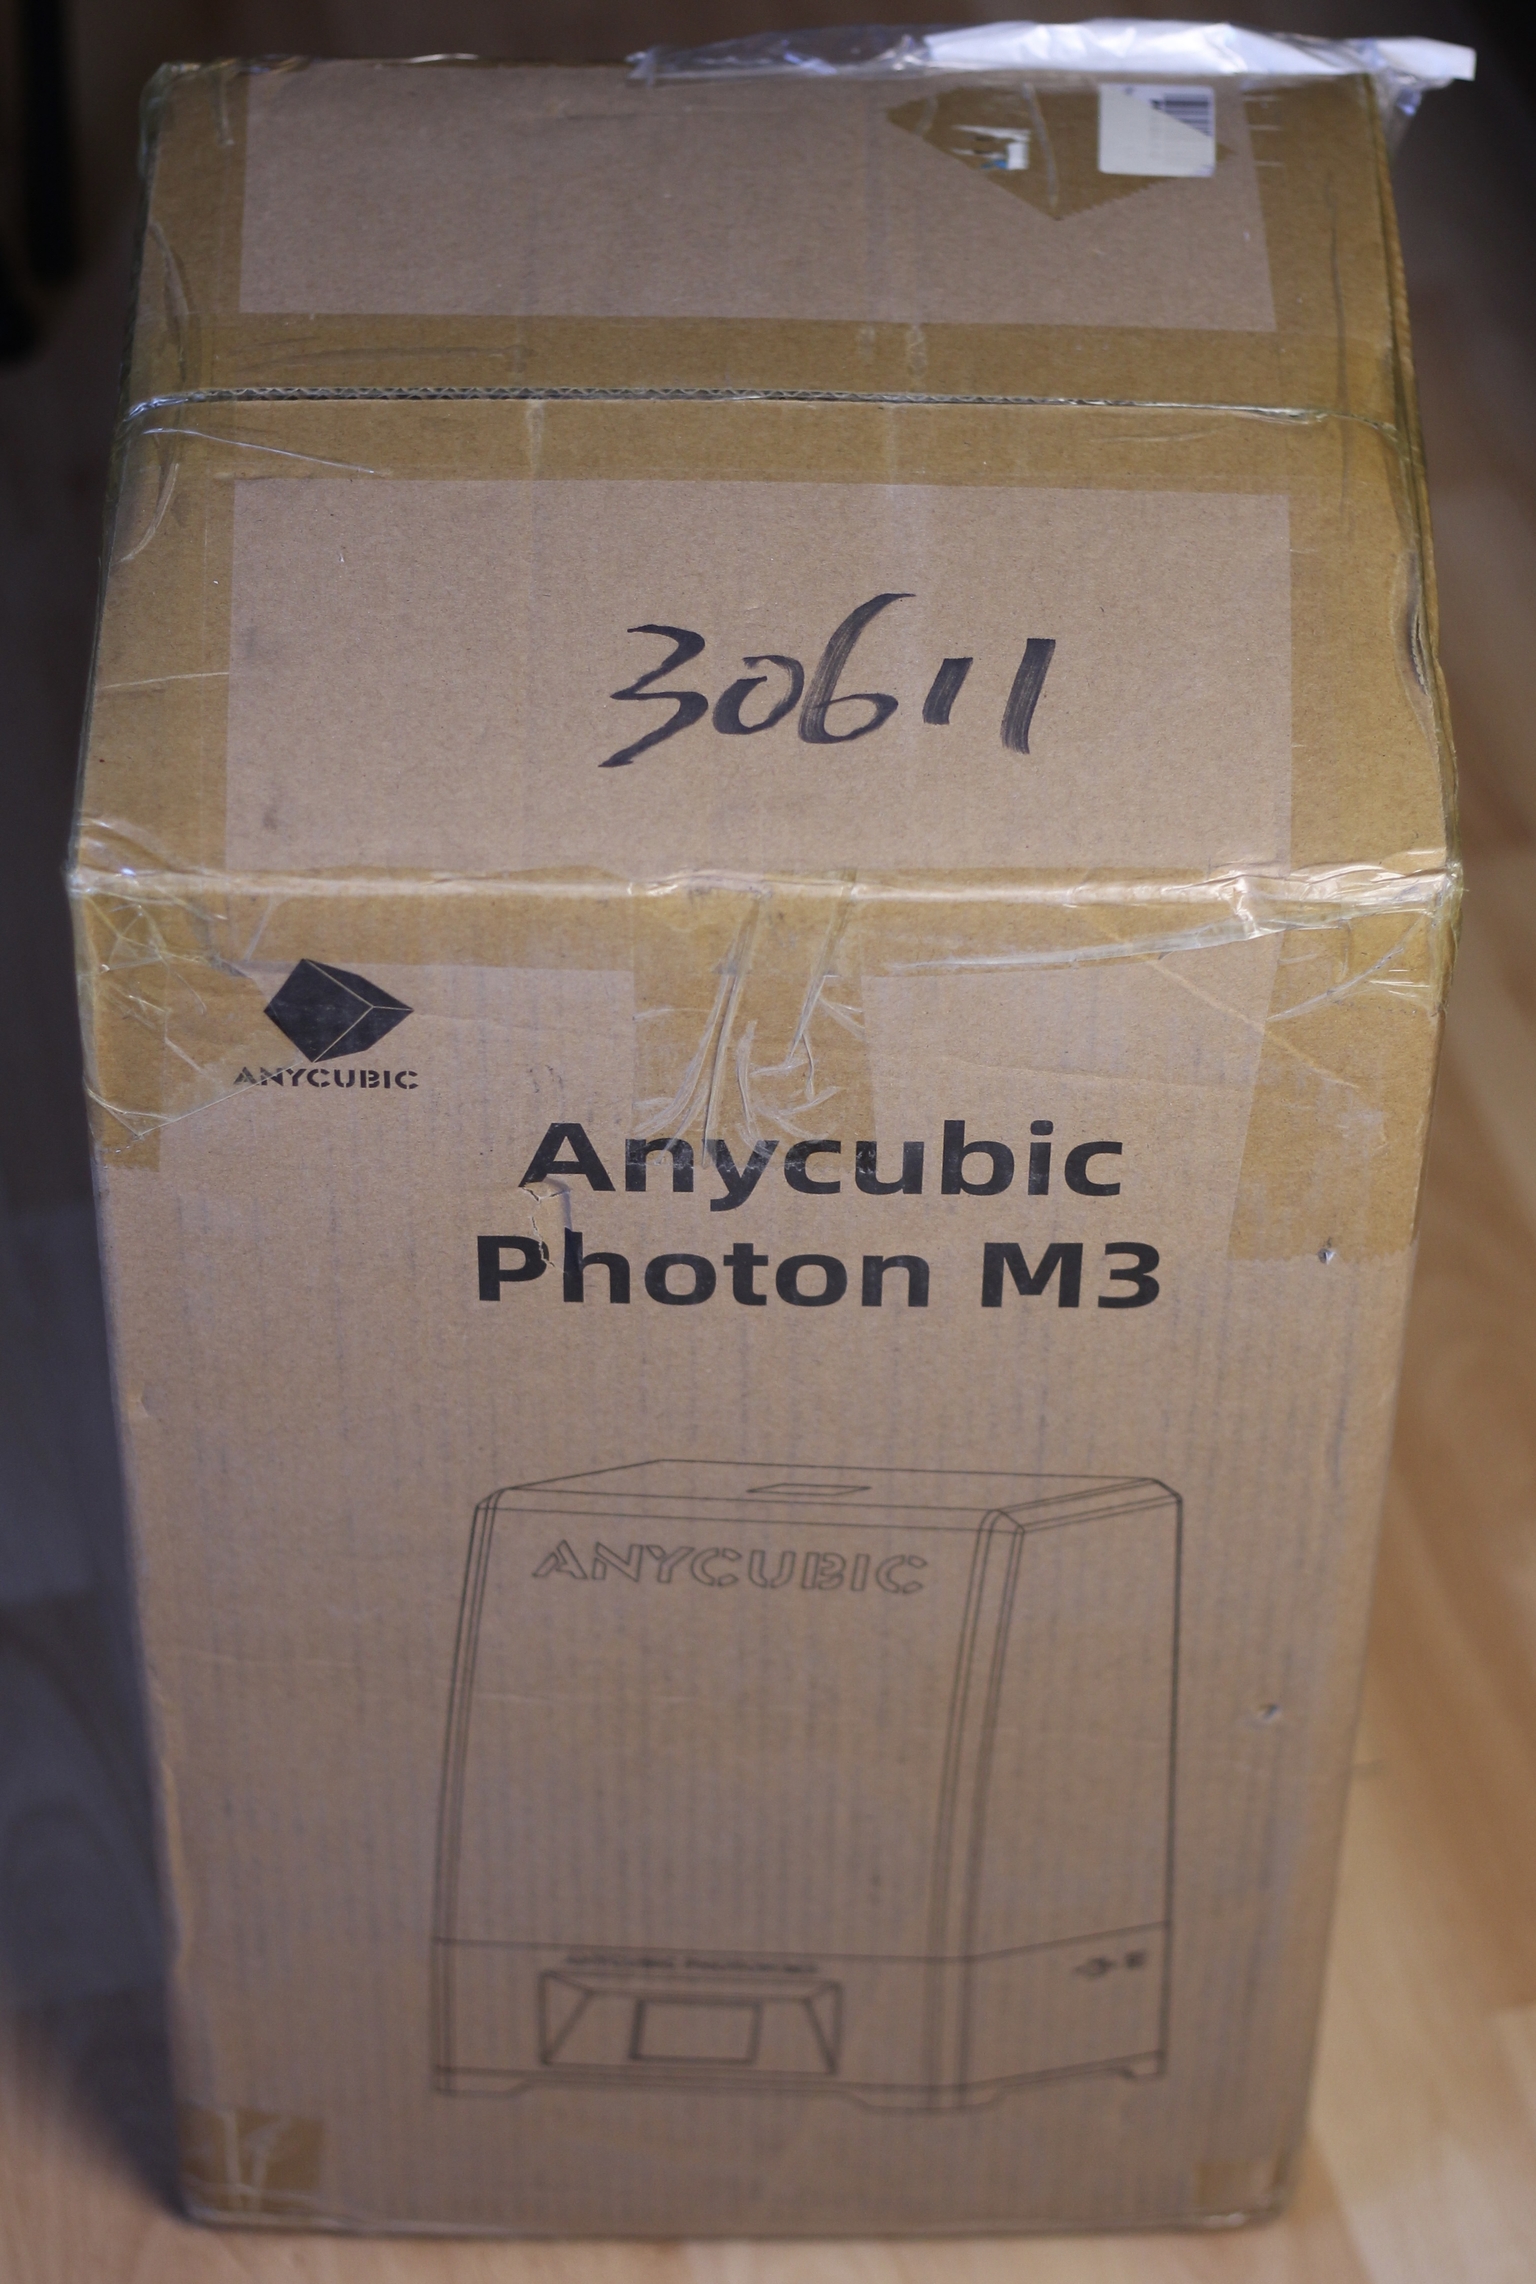 Anycubic Photon M3 Review Packaging1 | Anycubic Photon M3 Review: Bridging the gap